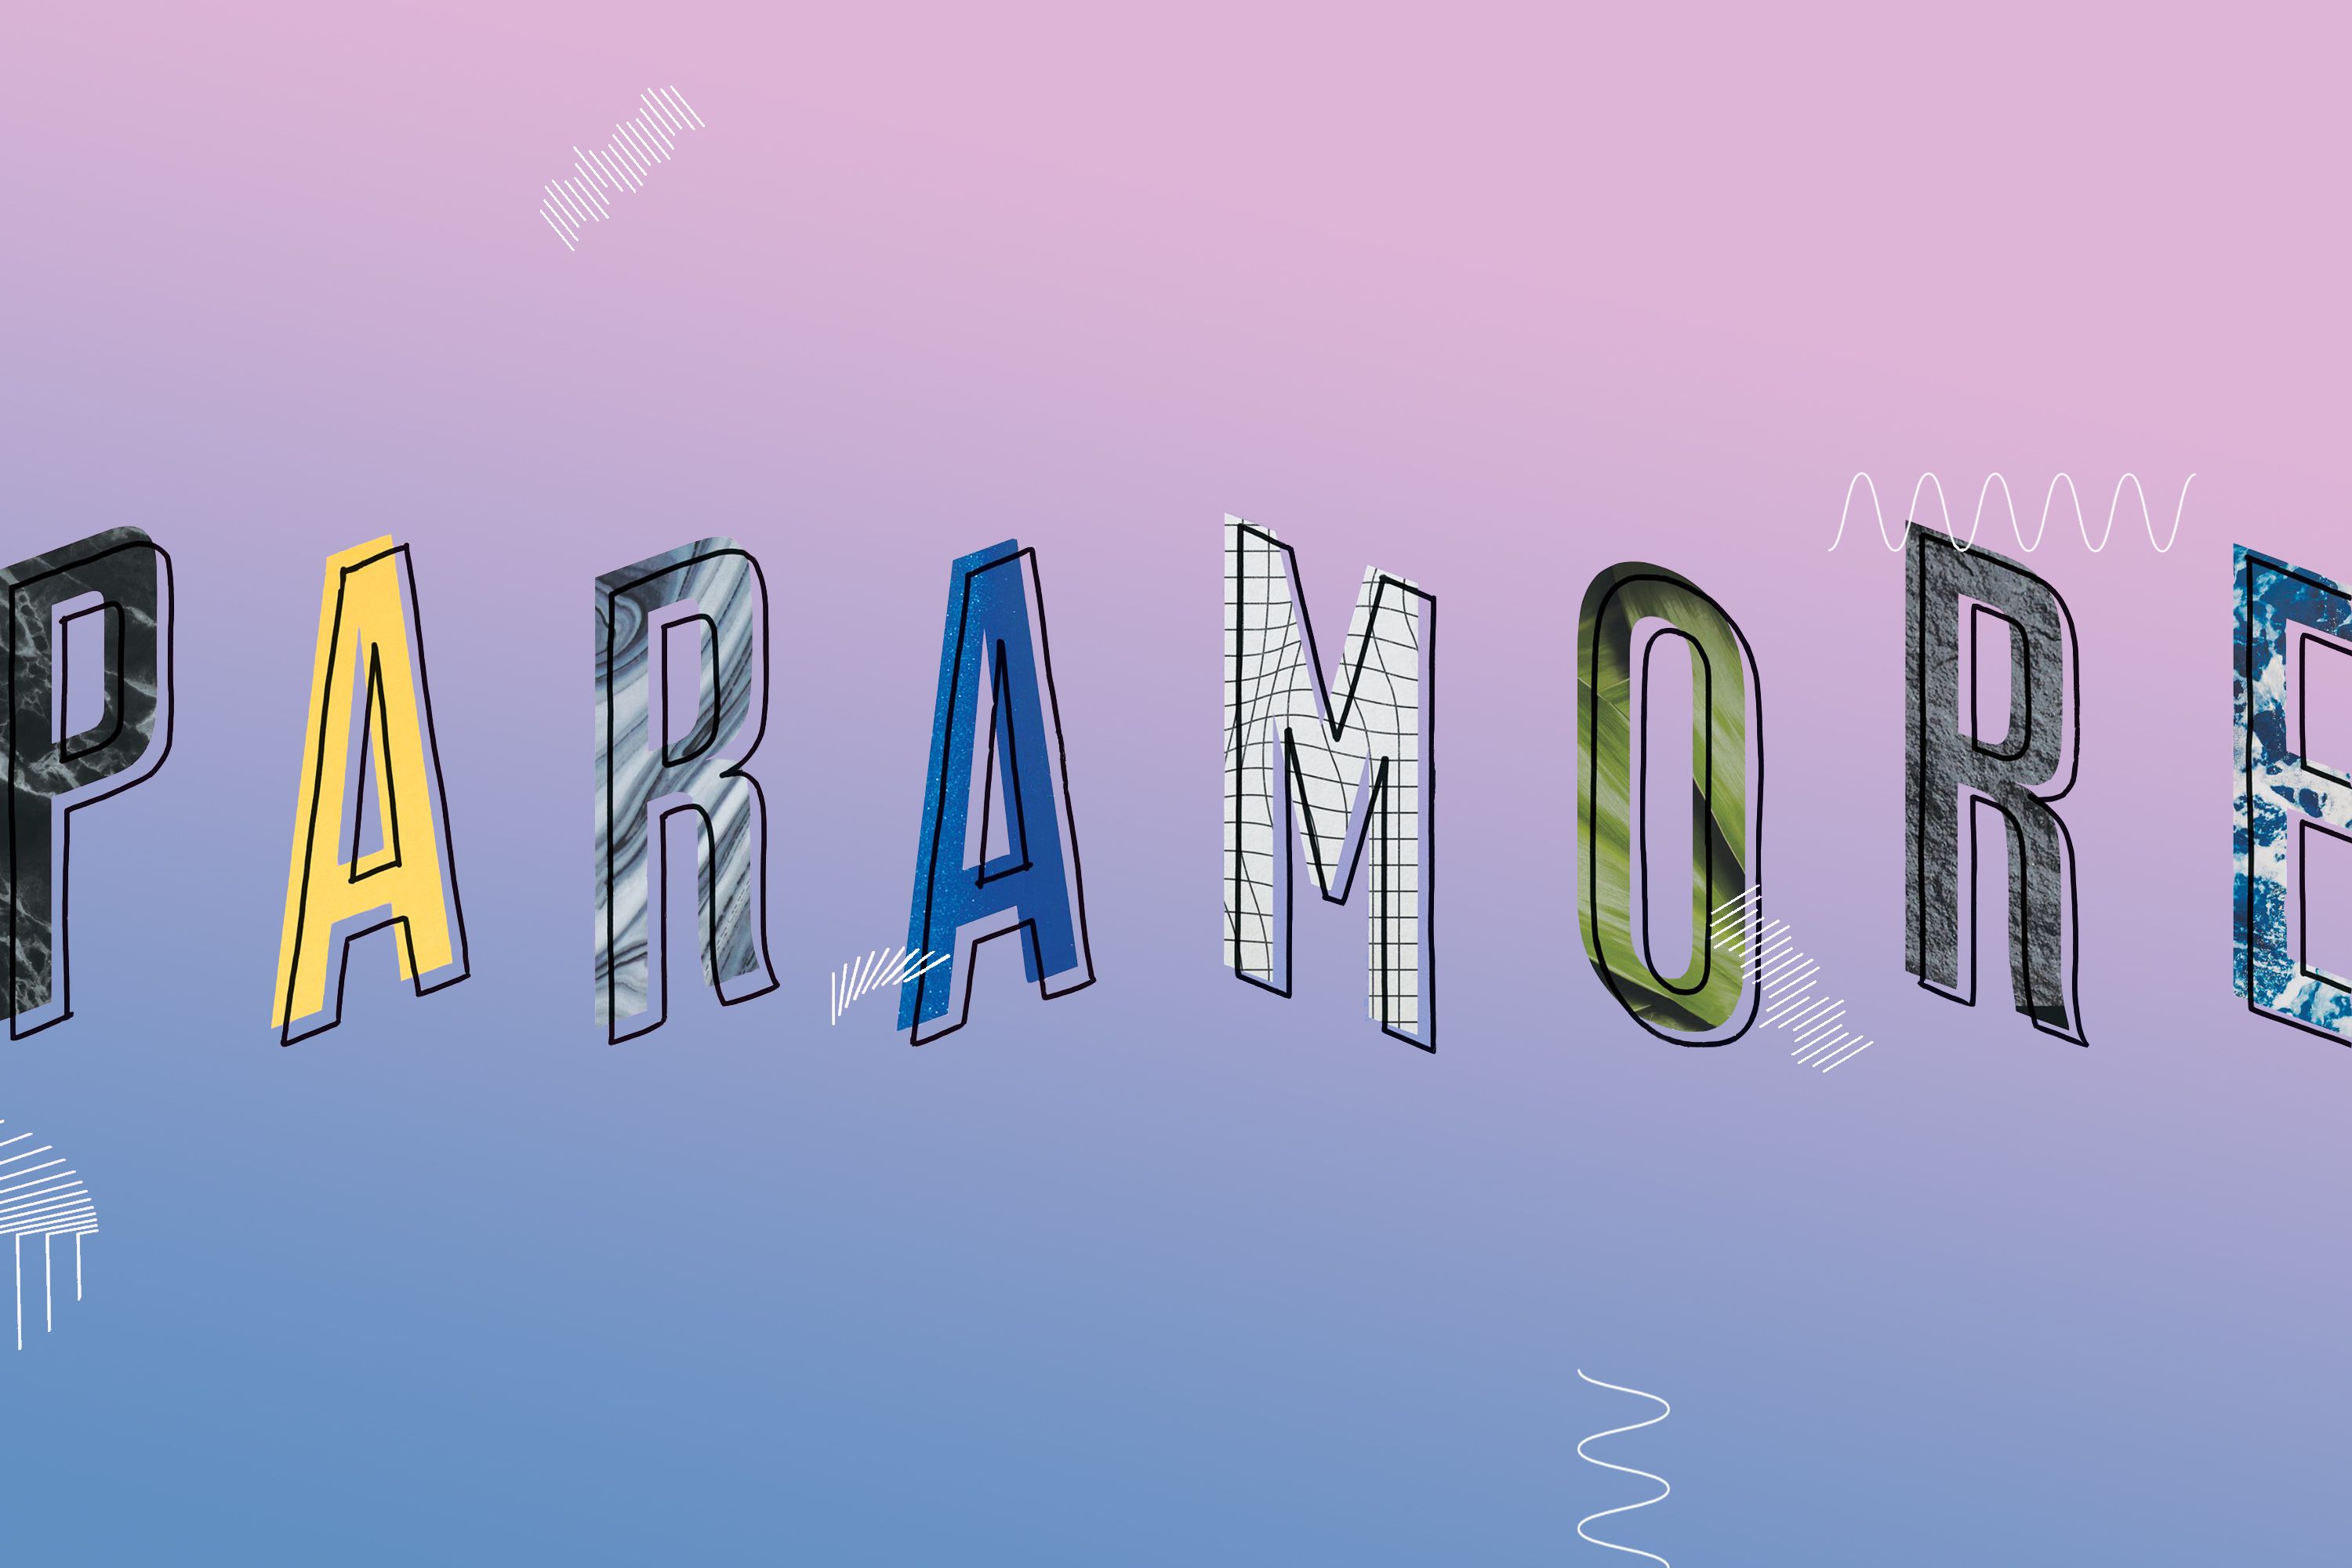 Paramore Wallpapers